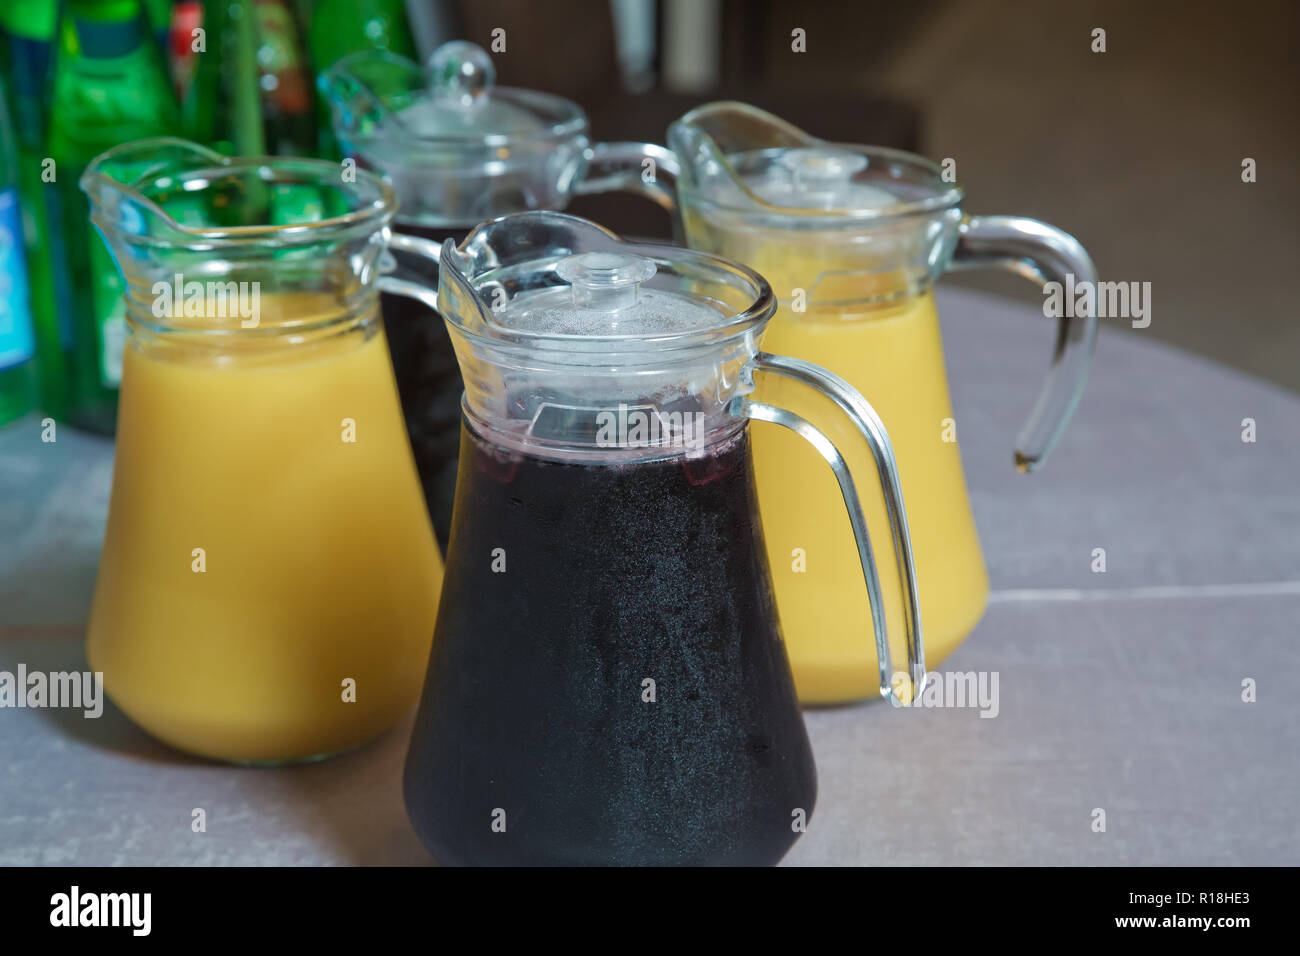 https://c8.alamy.com/comp/R18HE3/yellow-and-red-smoothie-juice-delicious-orange-juice-in-jug-uice-in-heavy-glass-jug-orange-yellow-and-red-glass-pitcher-R18HE3.jpg